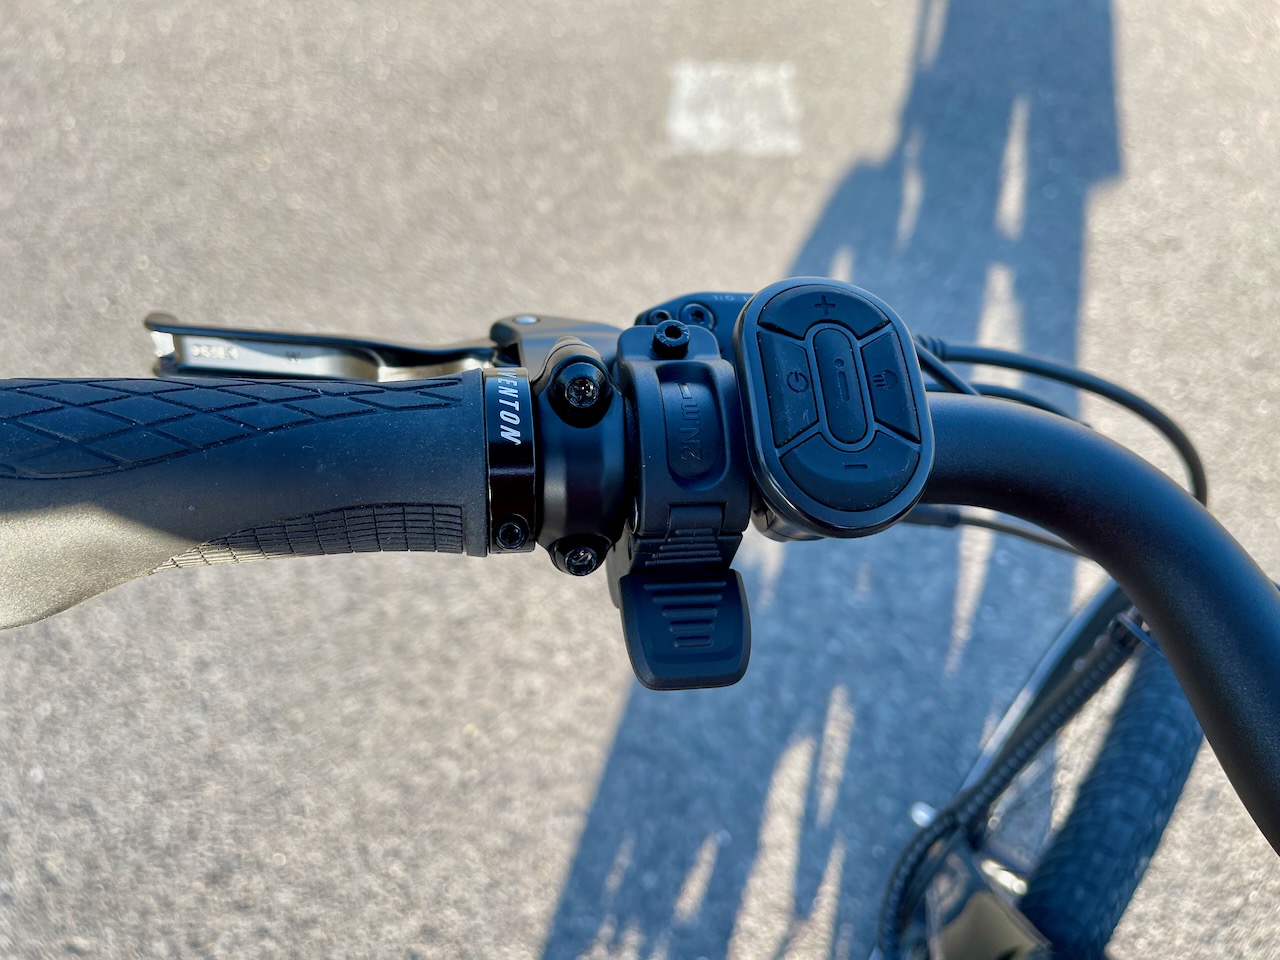 Aventon Pace 500 and 350 Ebikes buttons